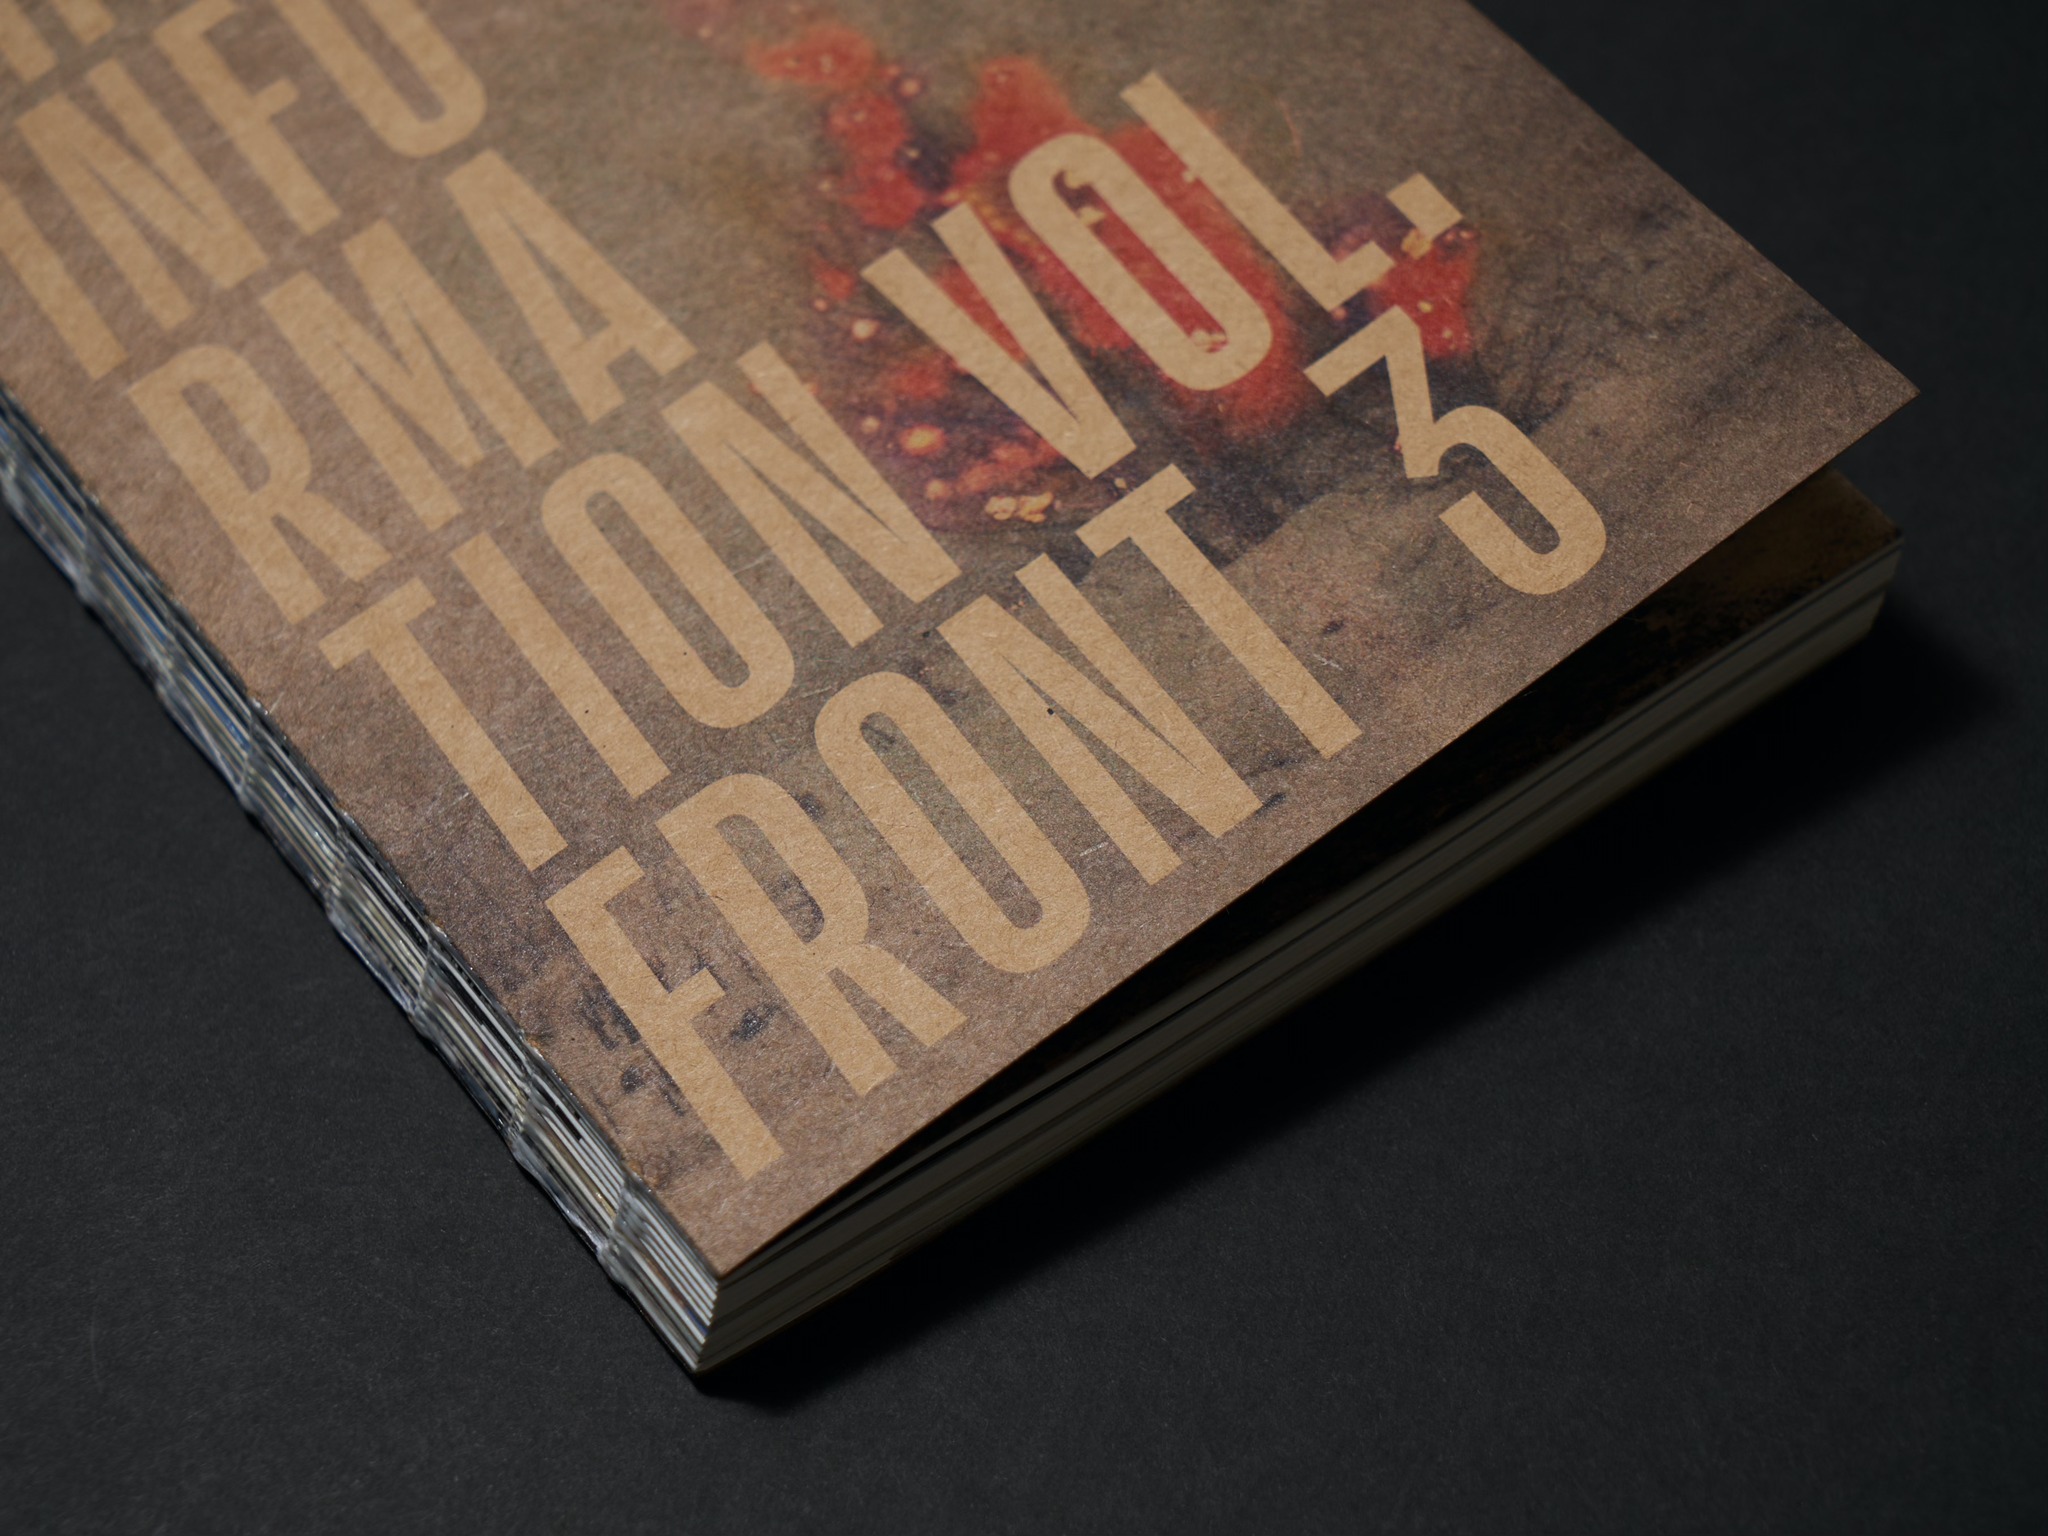 Odesa Photo Days: The Information Front Vol. 3 is out now